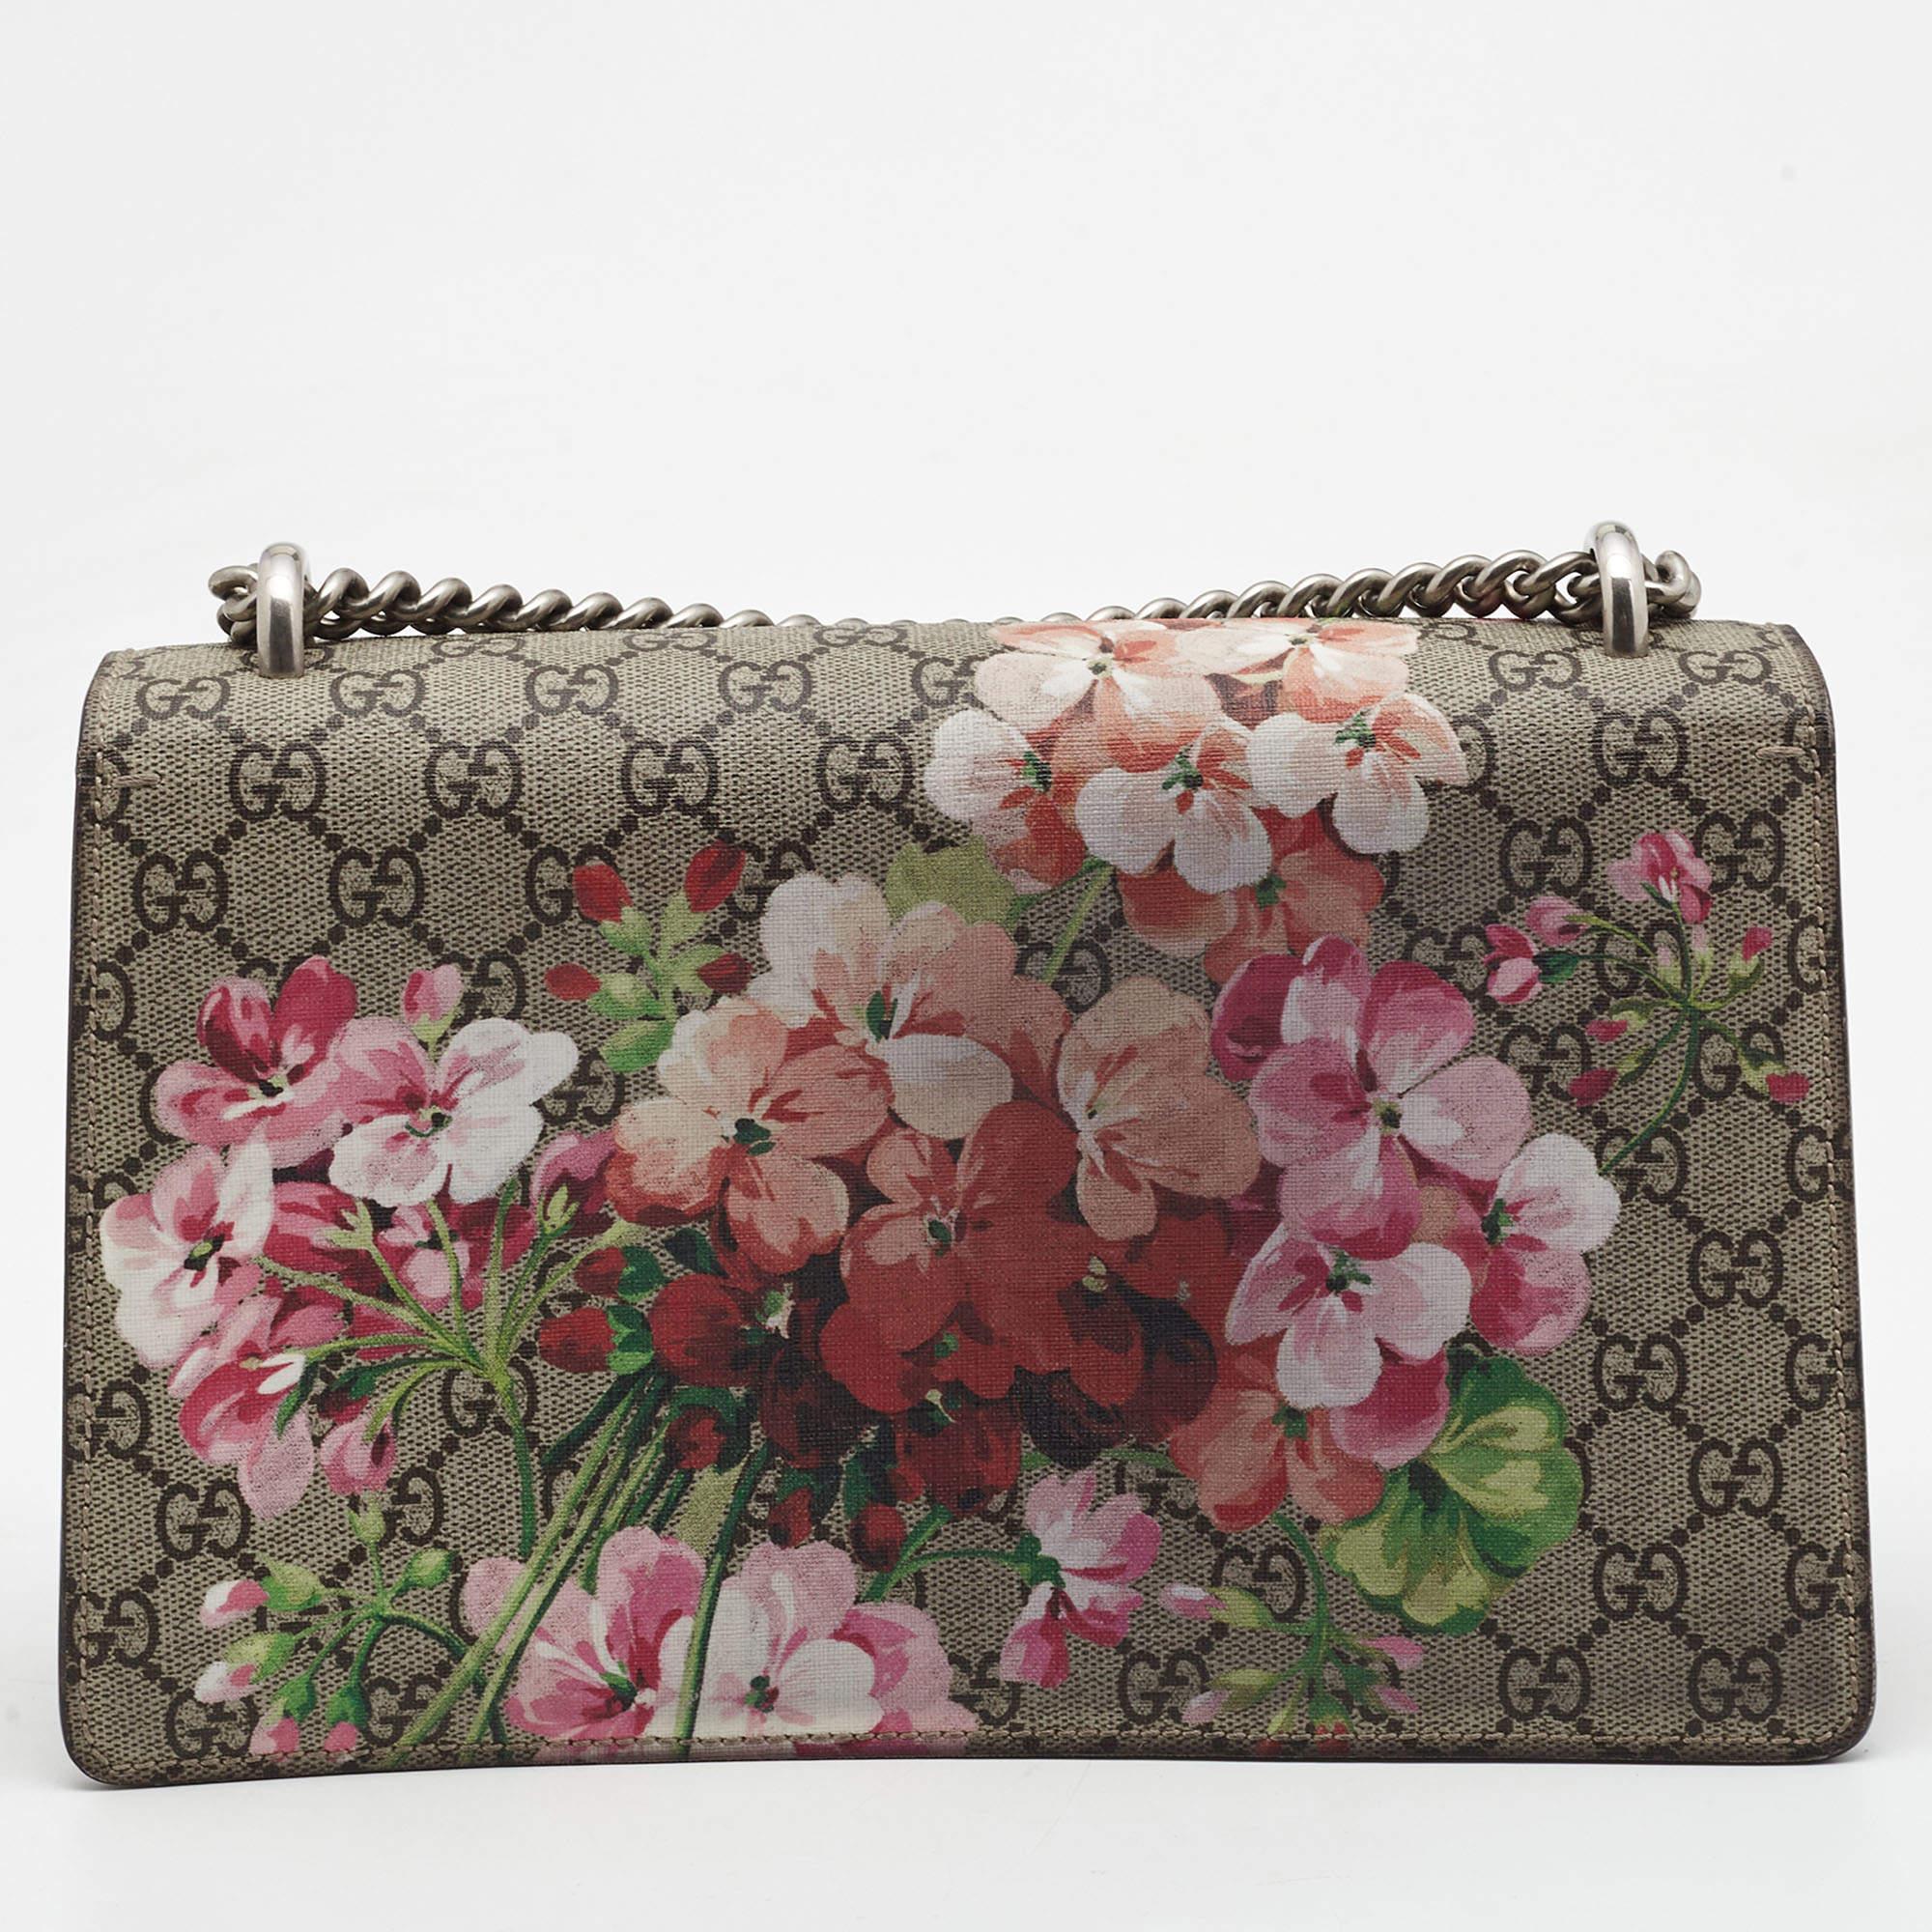 Thoughtful details, high quality, and everyday convenience mark this designer bag for women by Gucci. The bag is sewn with skill to deliver a refined look and an impeccable finish.

Includes: Original Dustbag, Info Booklet

